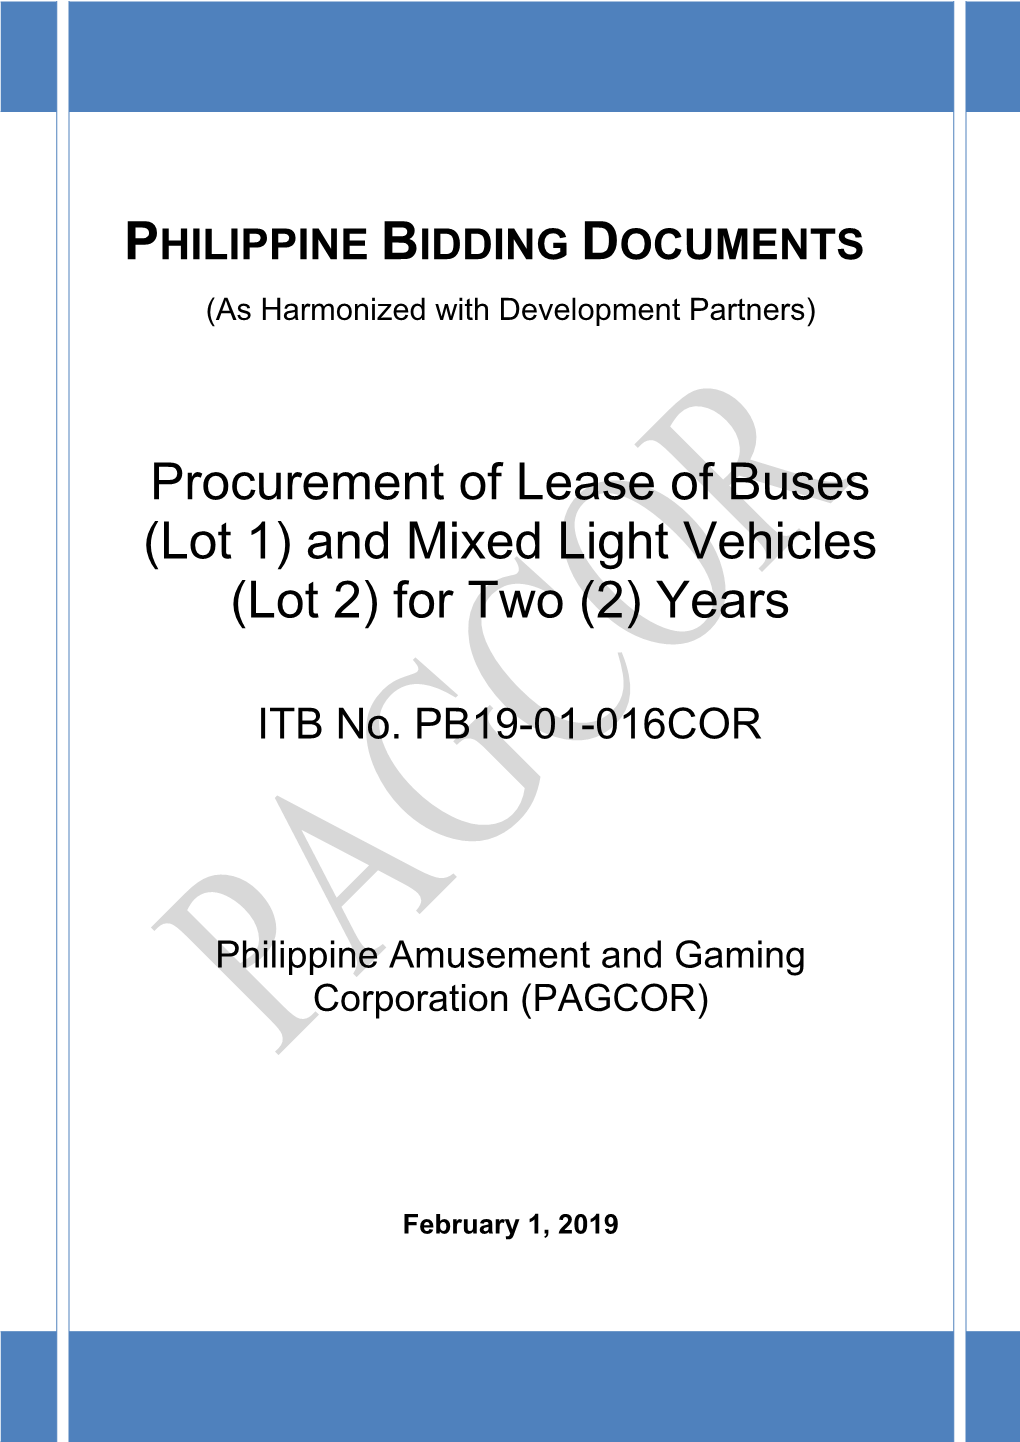 Procurement of Lease of Buses (Lot 1) and Mixed Light Vehicles (Lot 2) for Two (2) Years